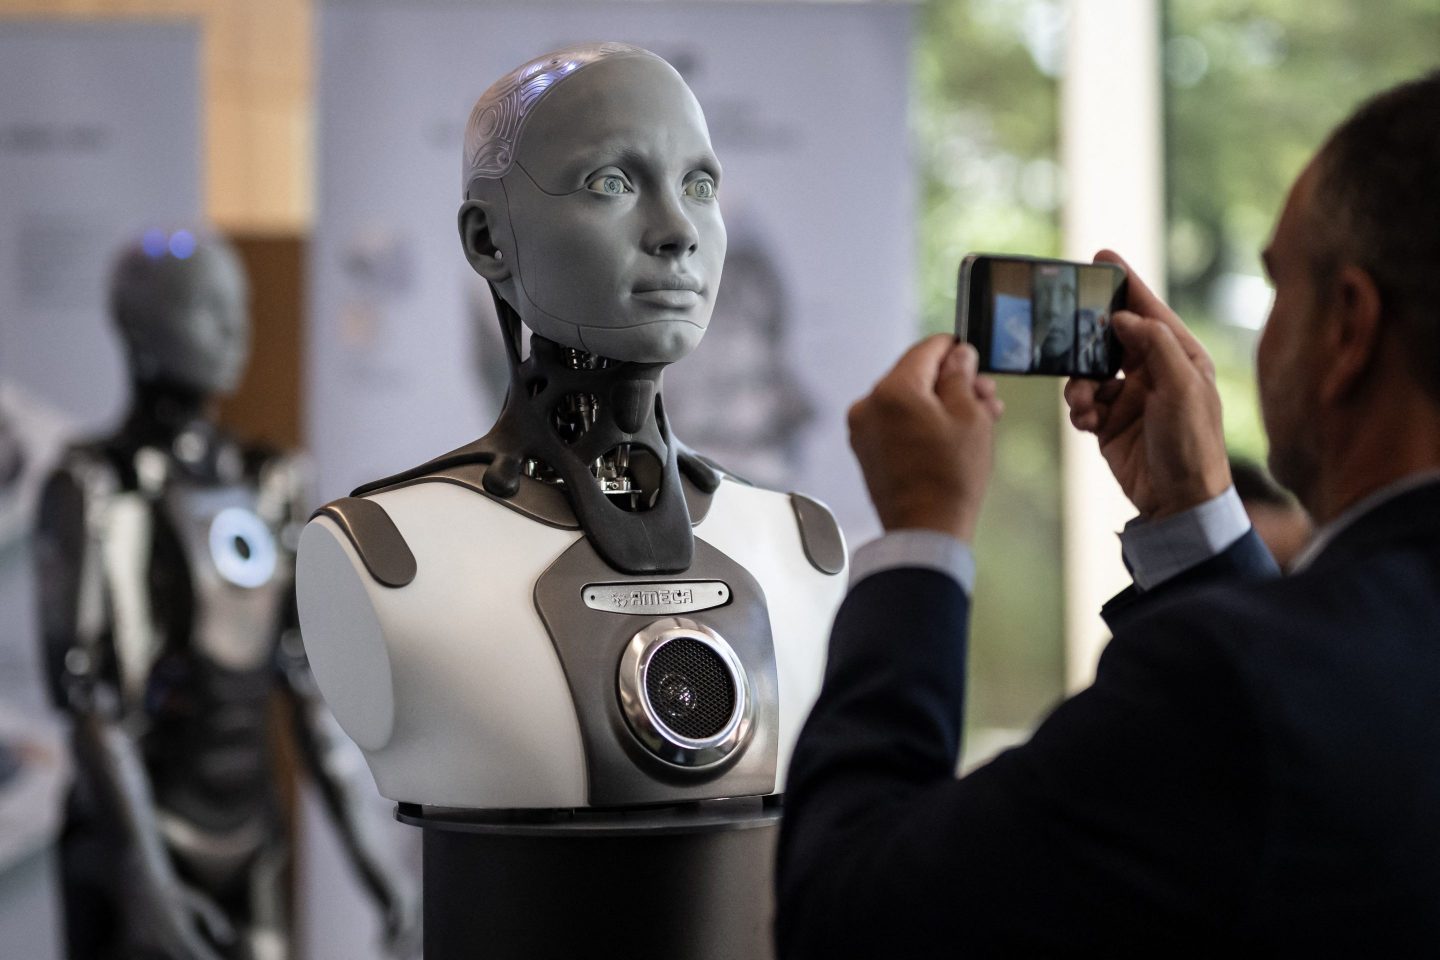 A visitor takes a picture of humanoid AI robot "Ameca" at the booth of Engineered Arts company during the world's largest gathering of humanoid AI Robots as part of International Telecommunication Union (ITU) AI for Good Global Summit in Geneva, on July 5, 2023.